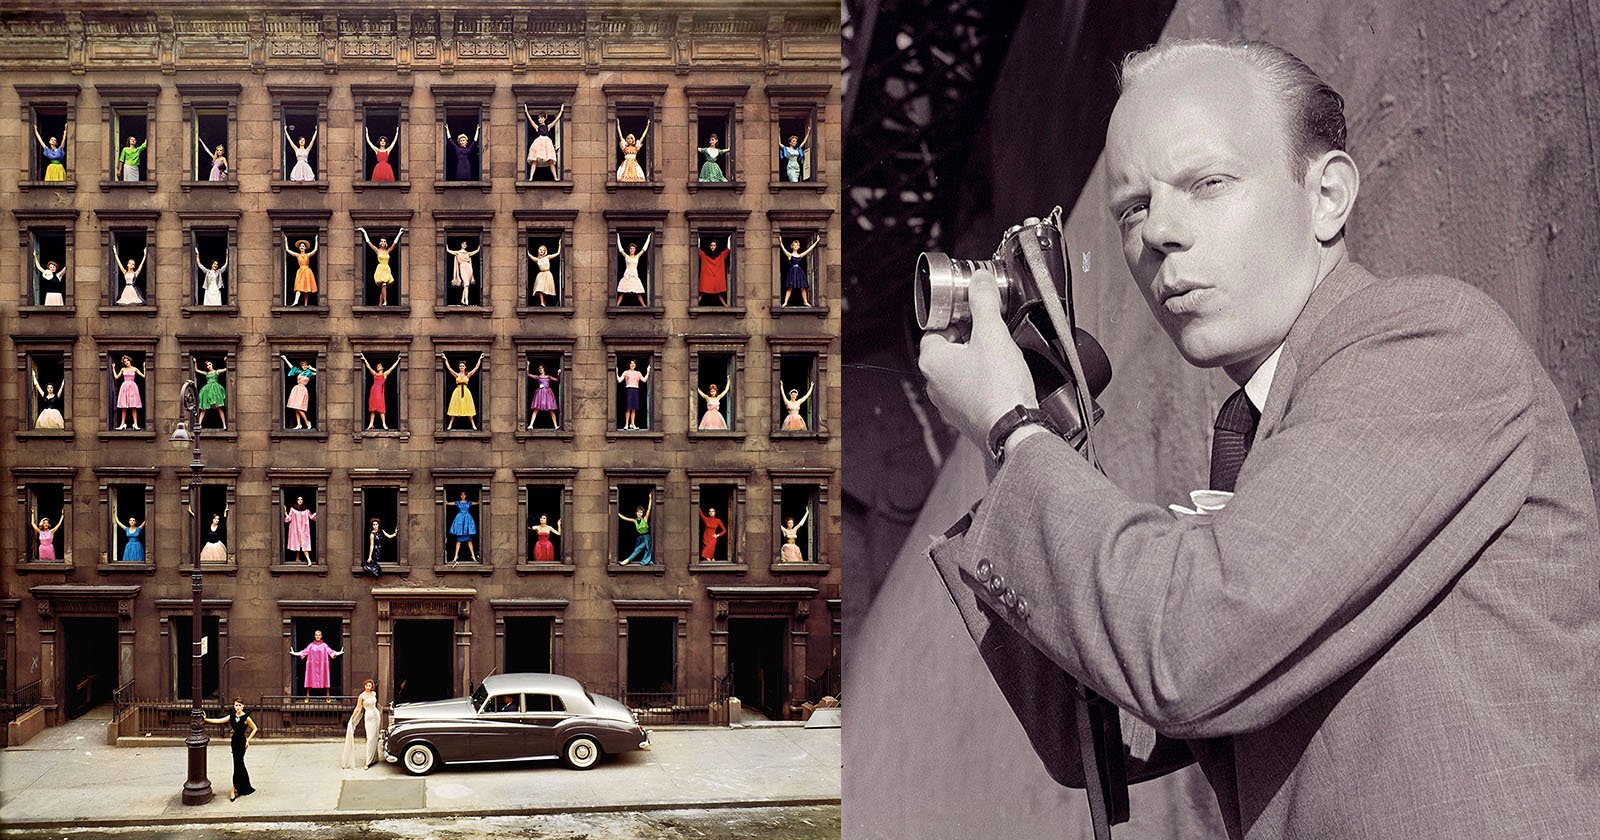 Is Girls in the Windows the Highest-Grossing Photo of All Time?